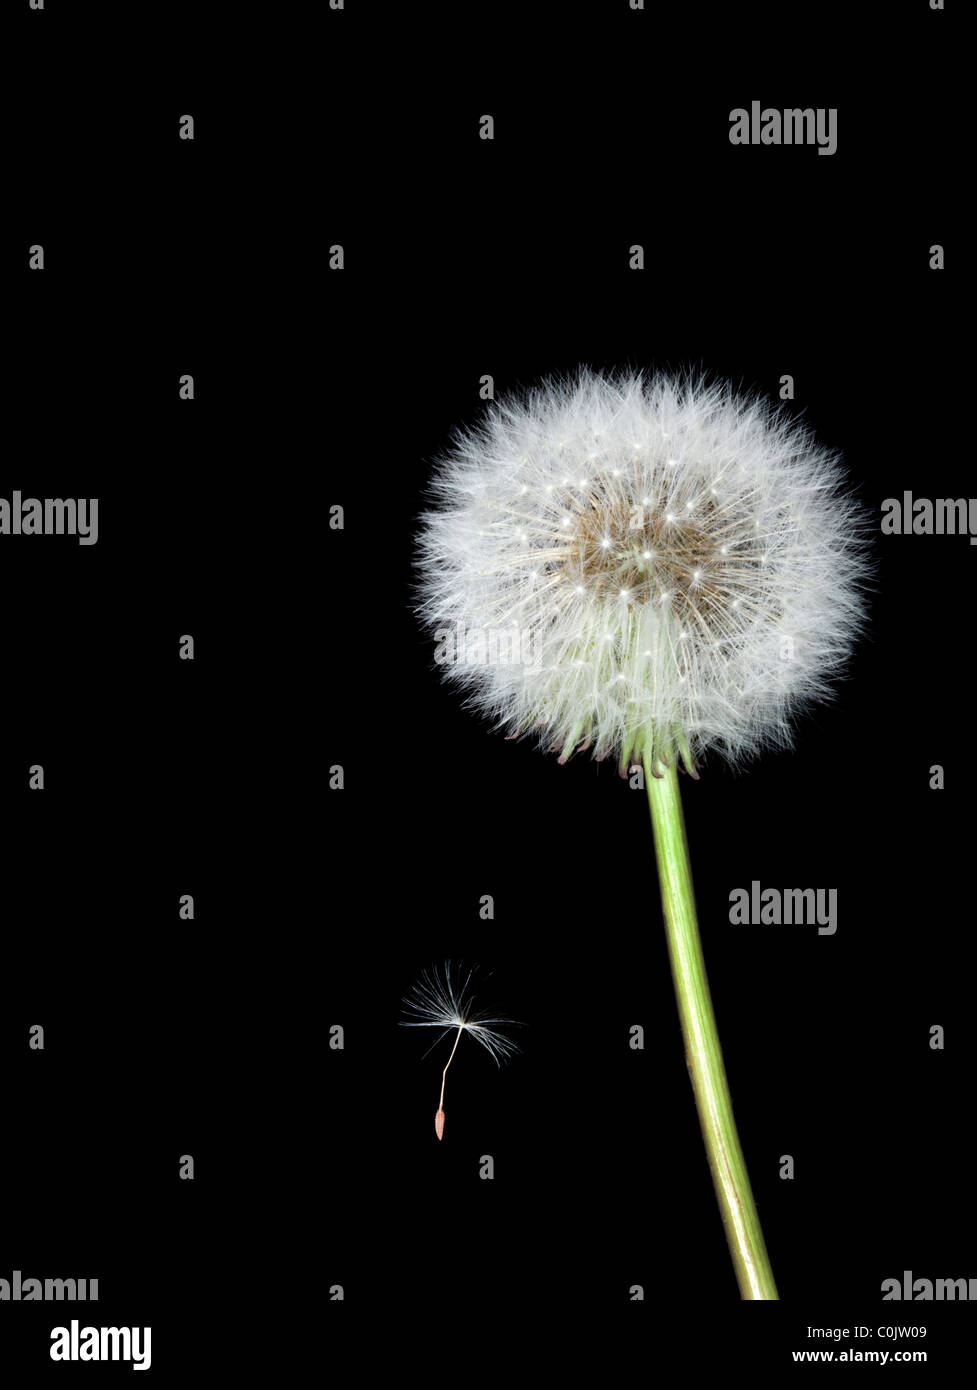 Dandelion with one seed falling on black background Stock Photo